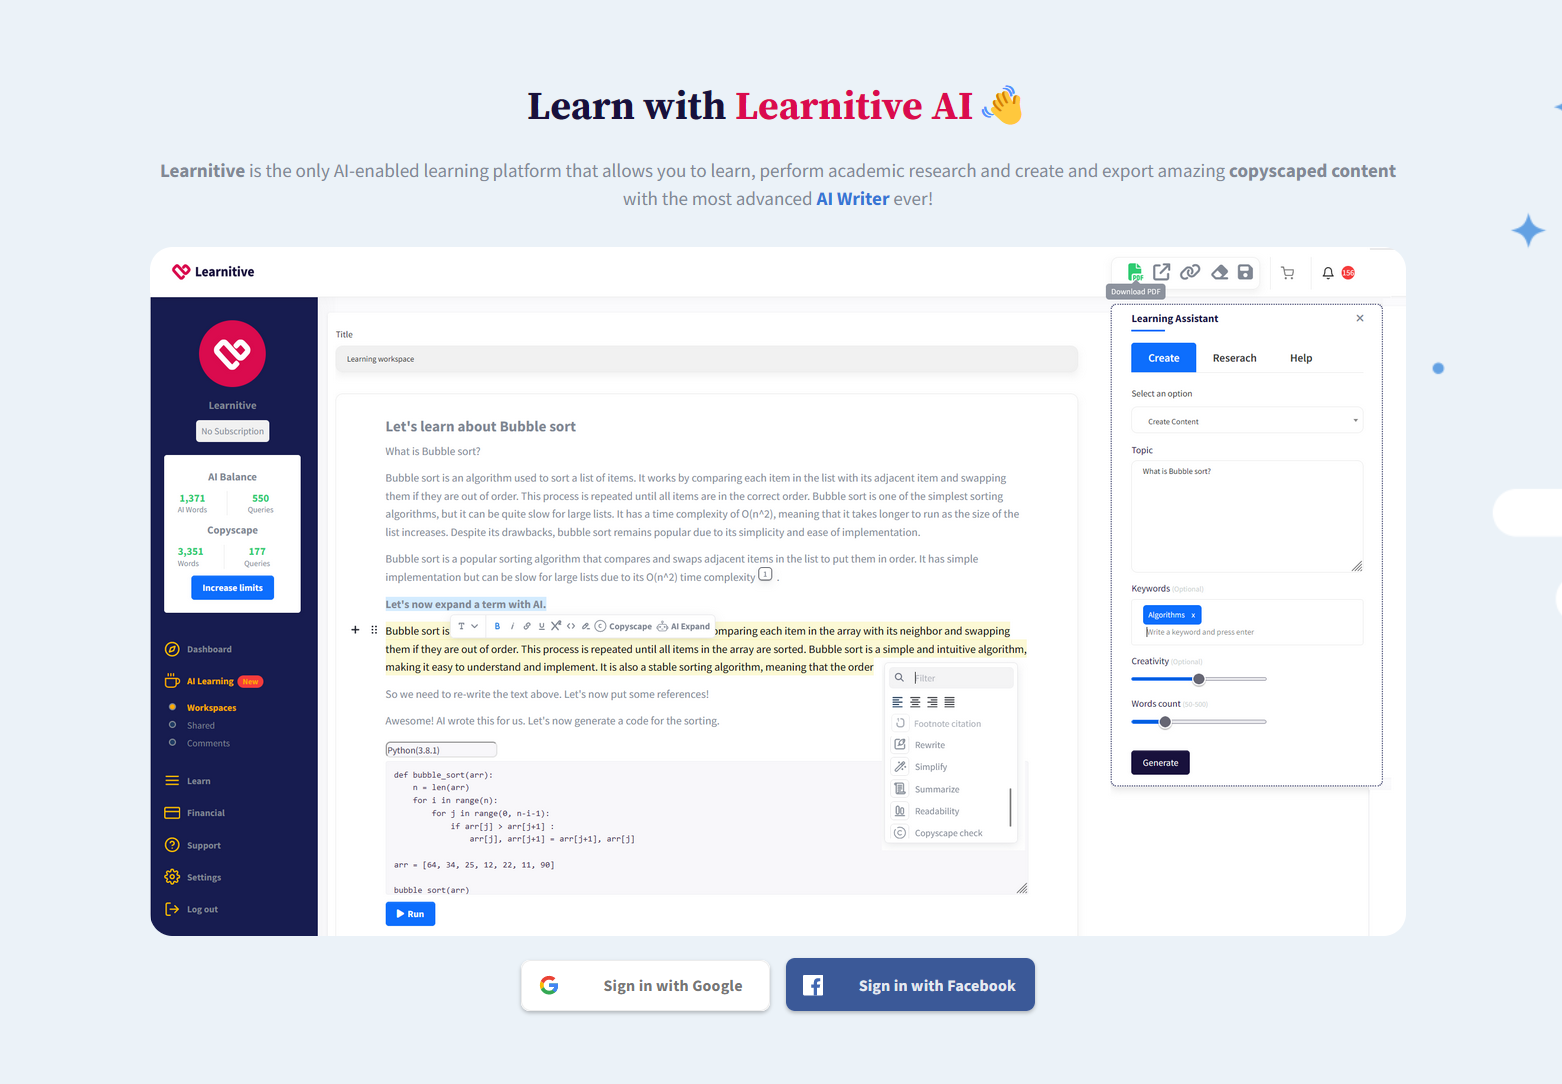 Create and Learn with Learnitive AI